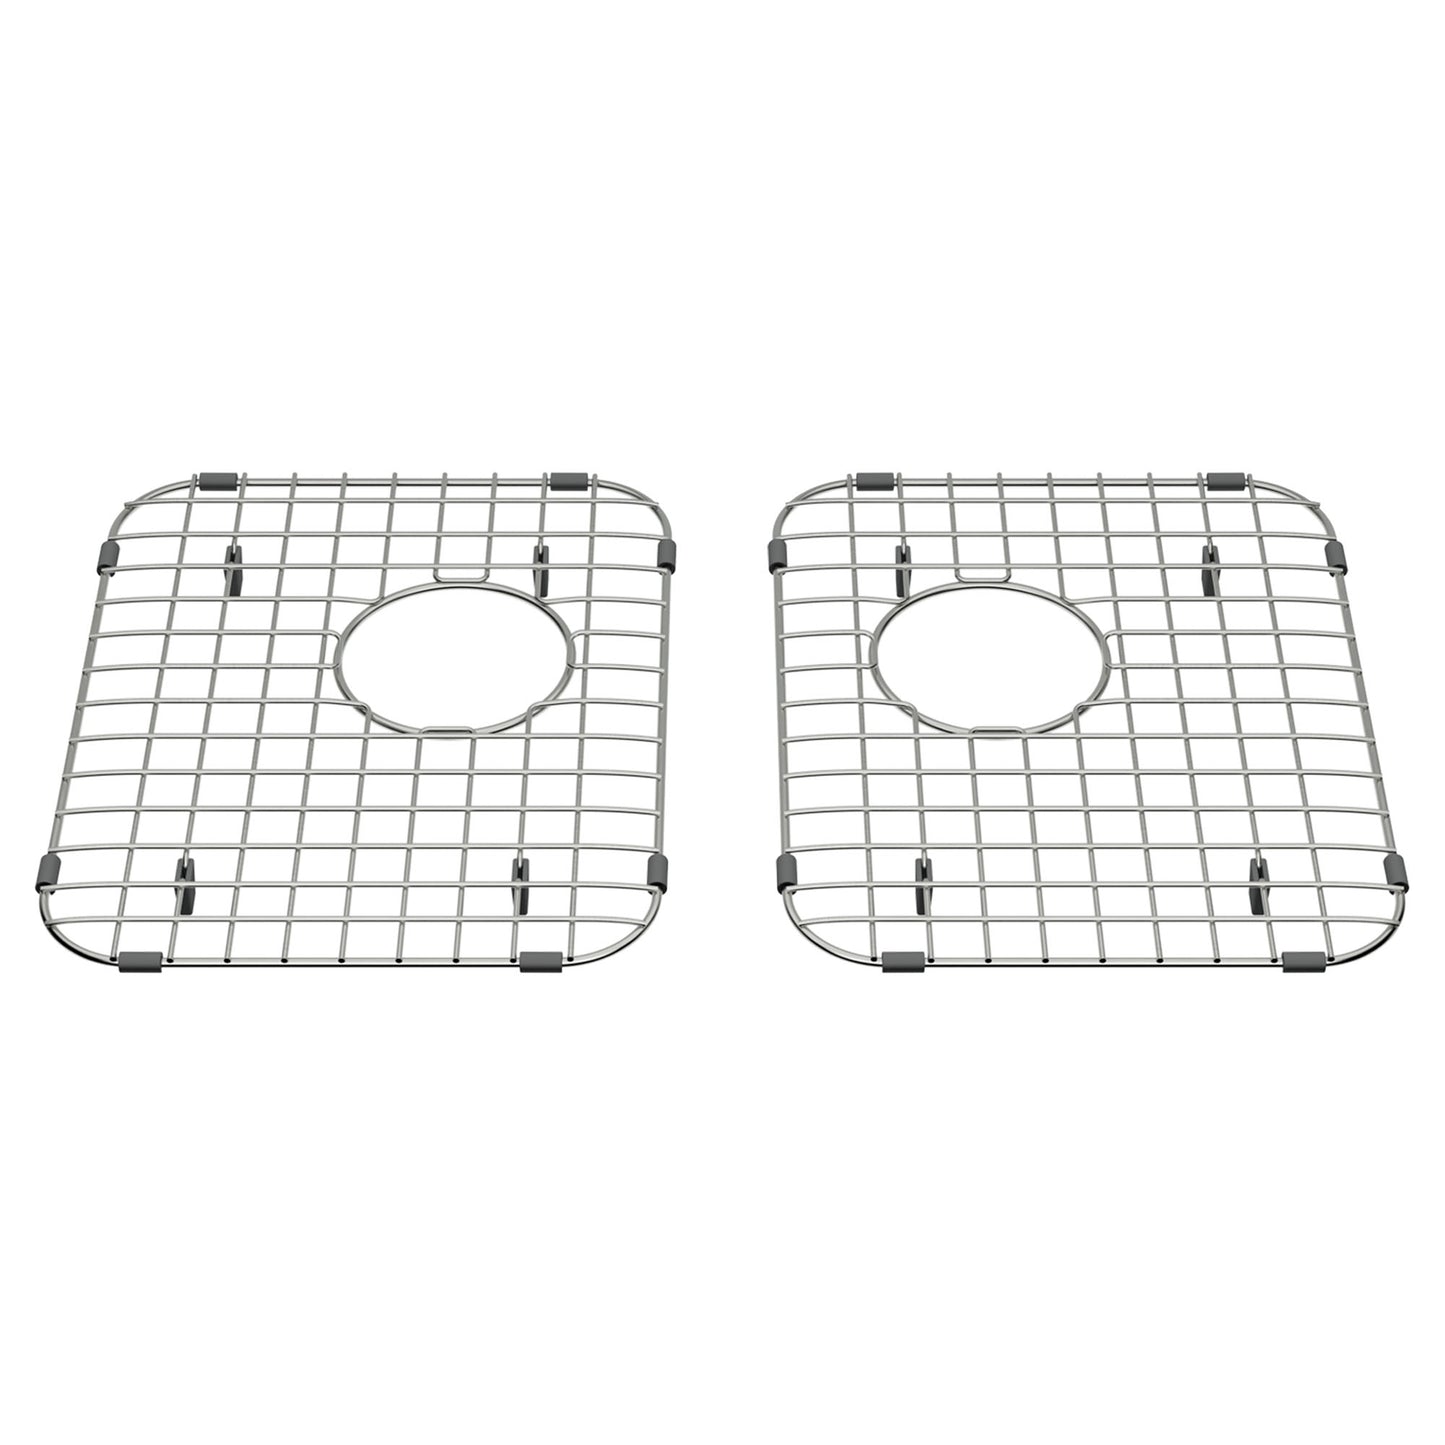 AMERICAN-STANDARD 8416000.075, Quince 33 x 22-Inch Double Bowl Kitchen Sink Grid – Set of 2 in Stainless Stl